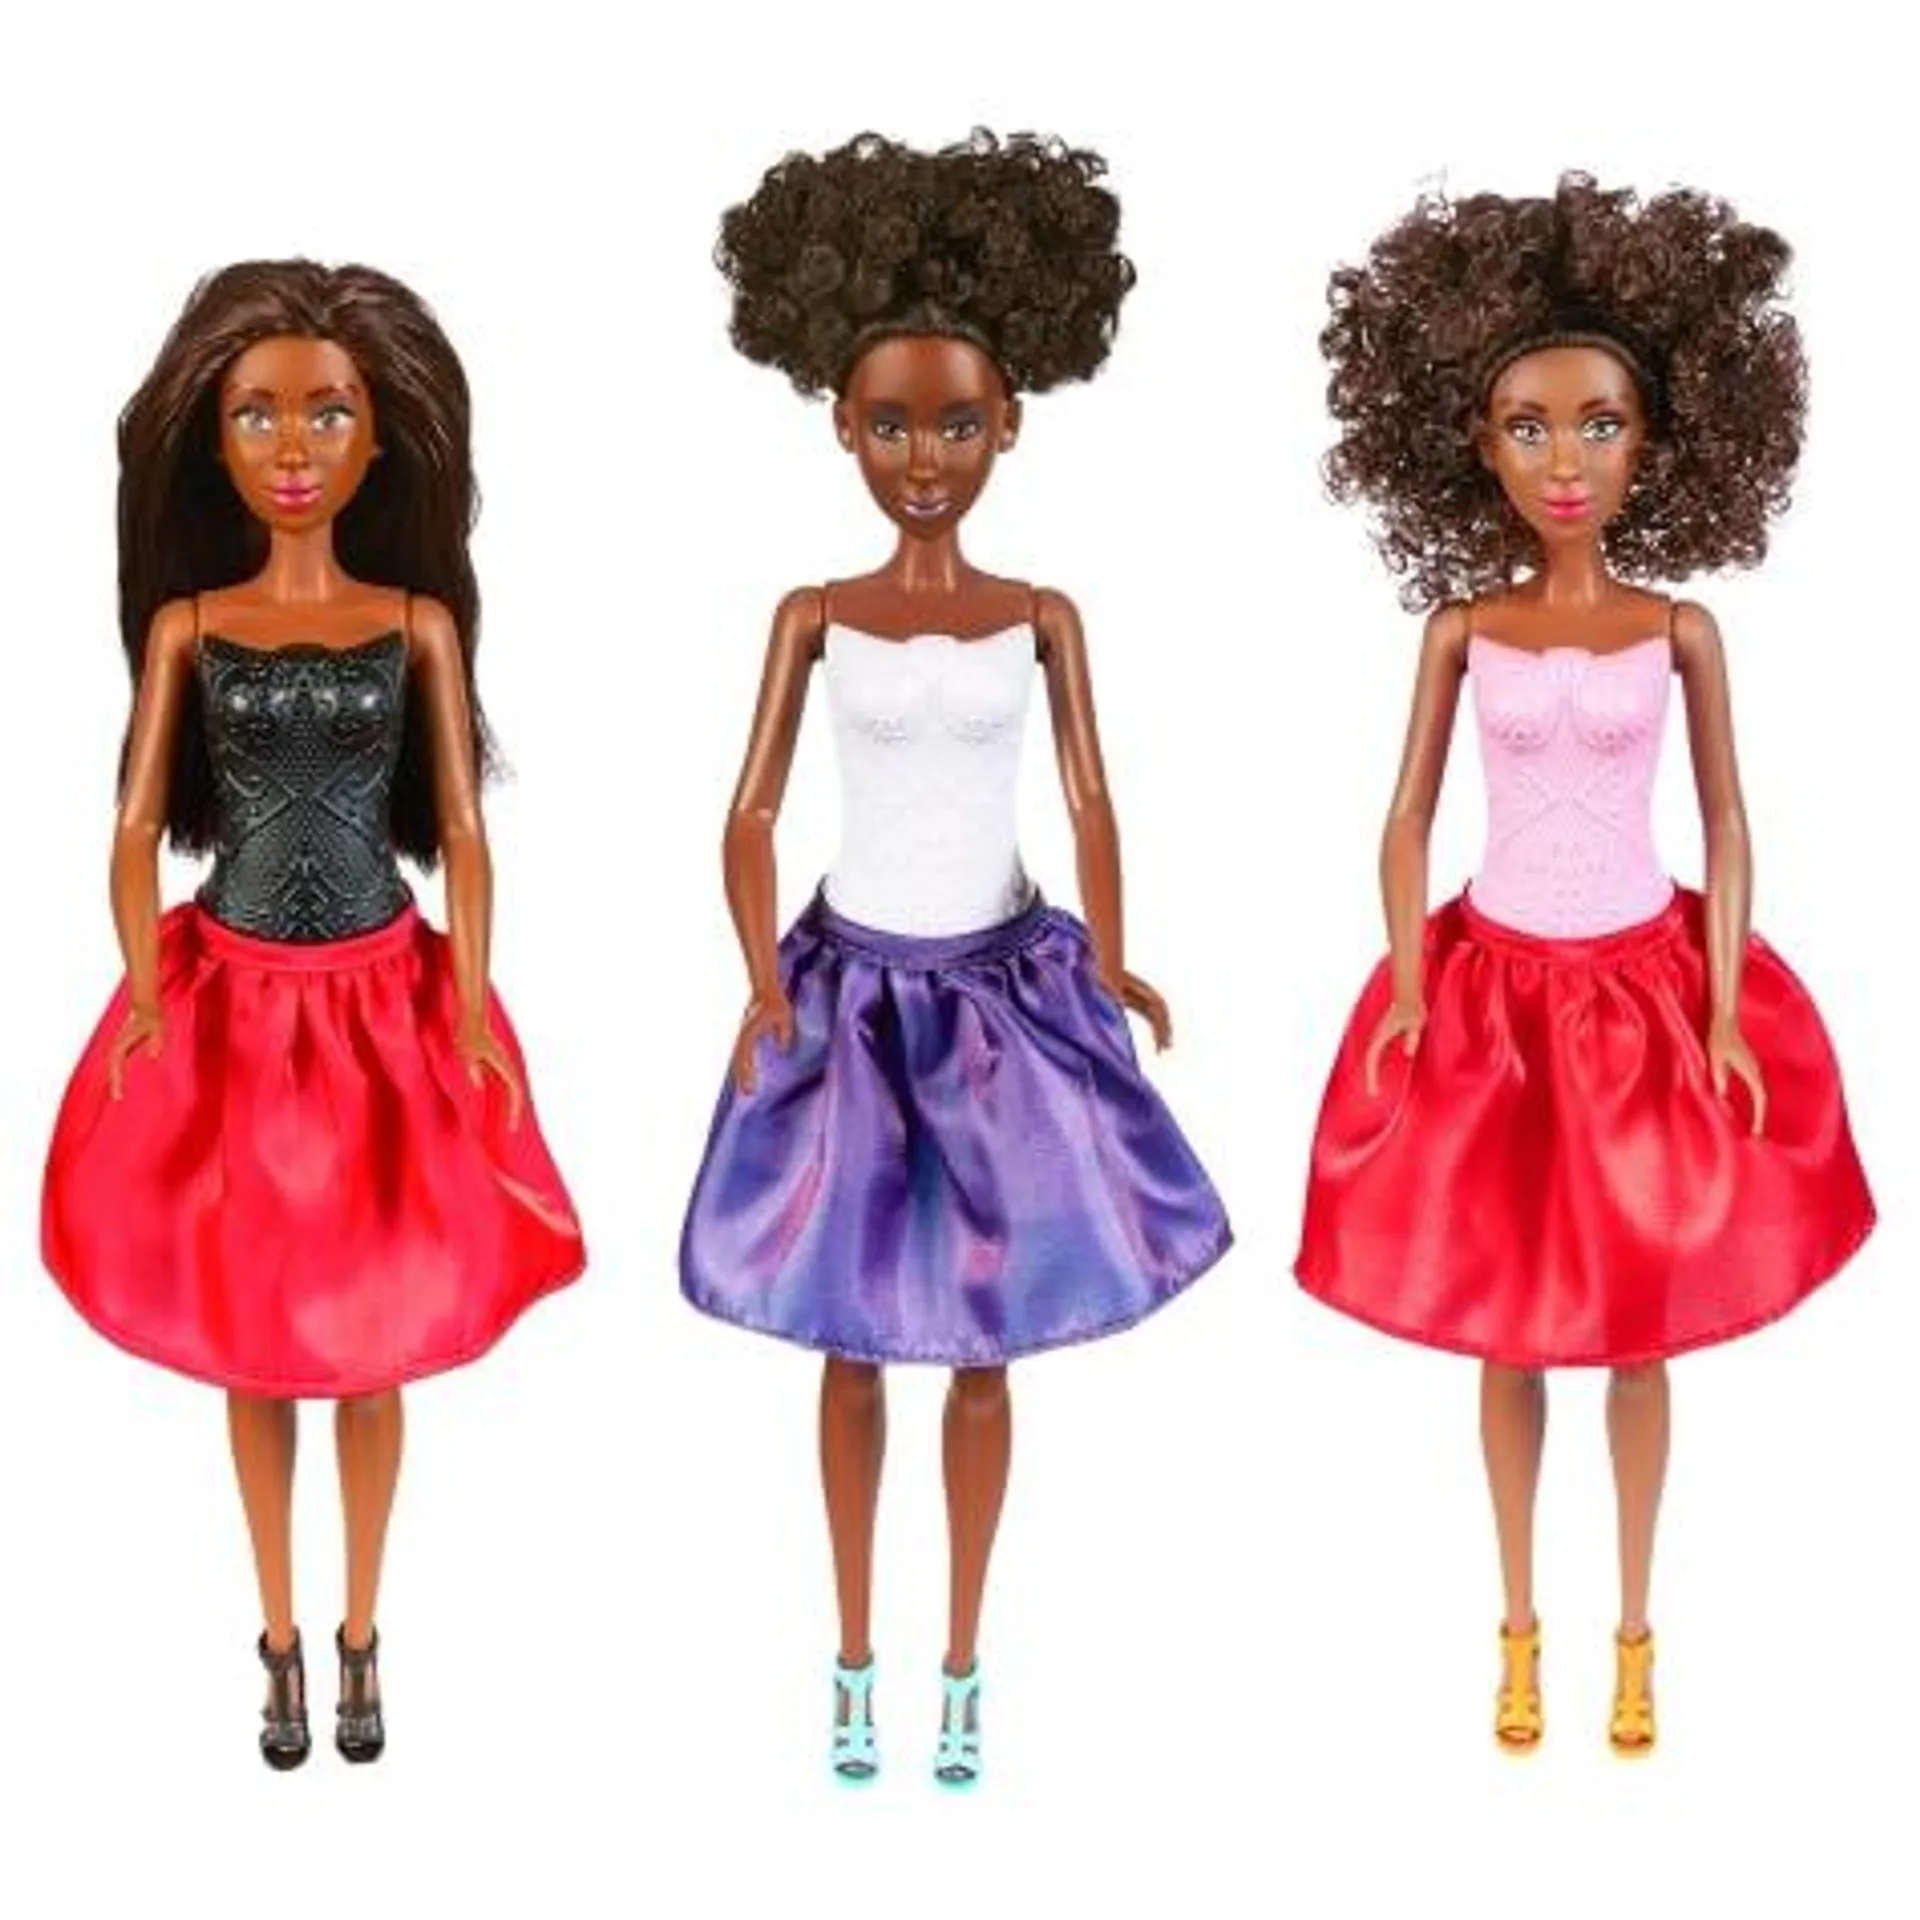 Simply Fresh Dolls, 11.5 in., Assorted